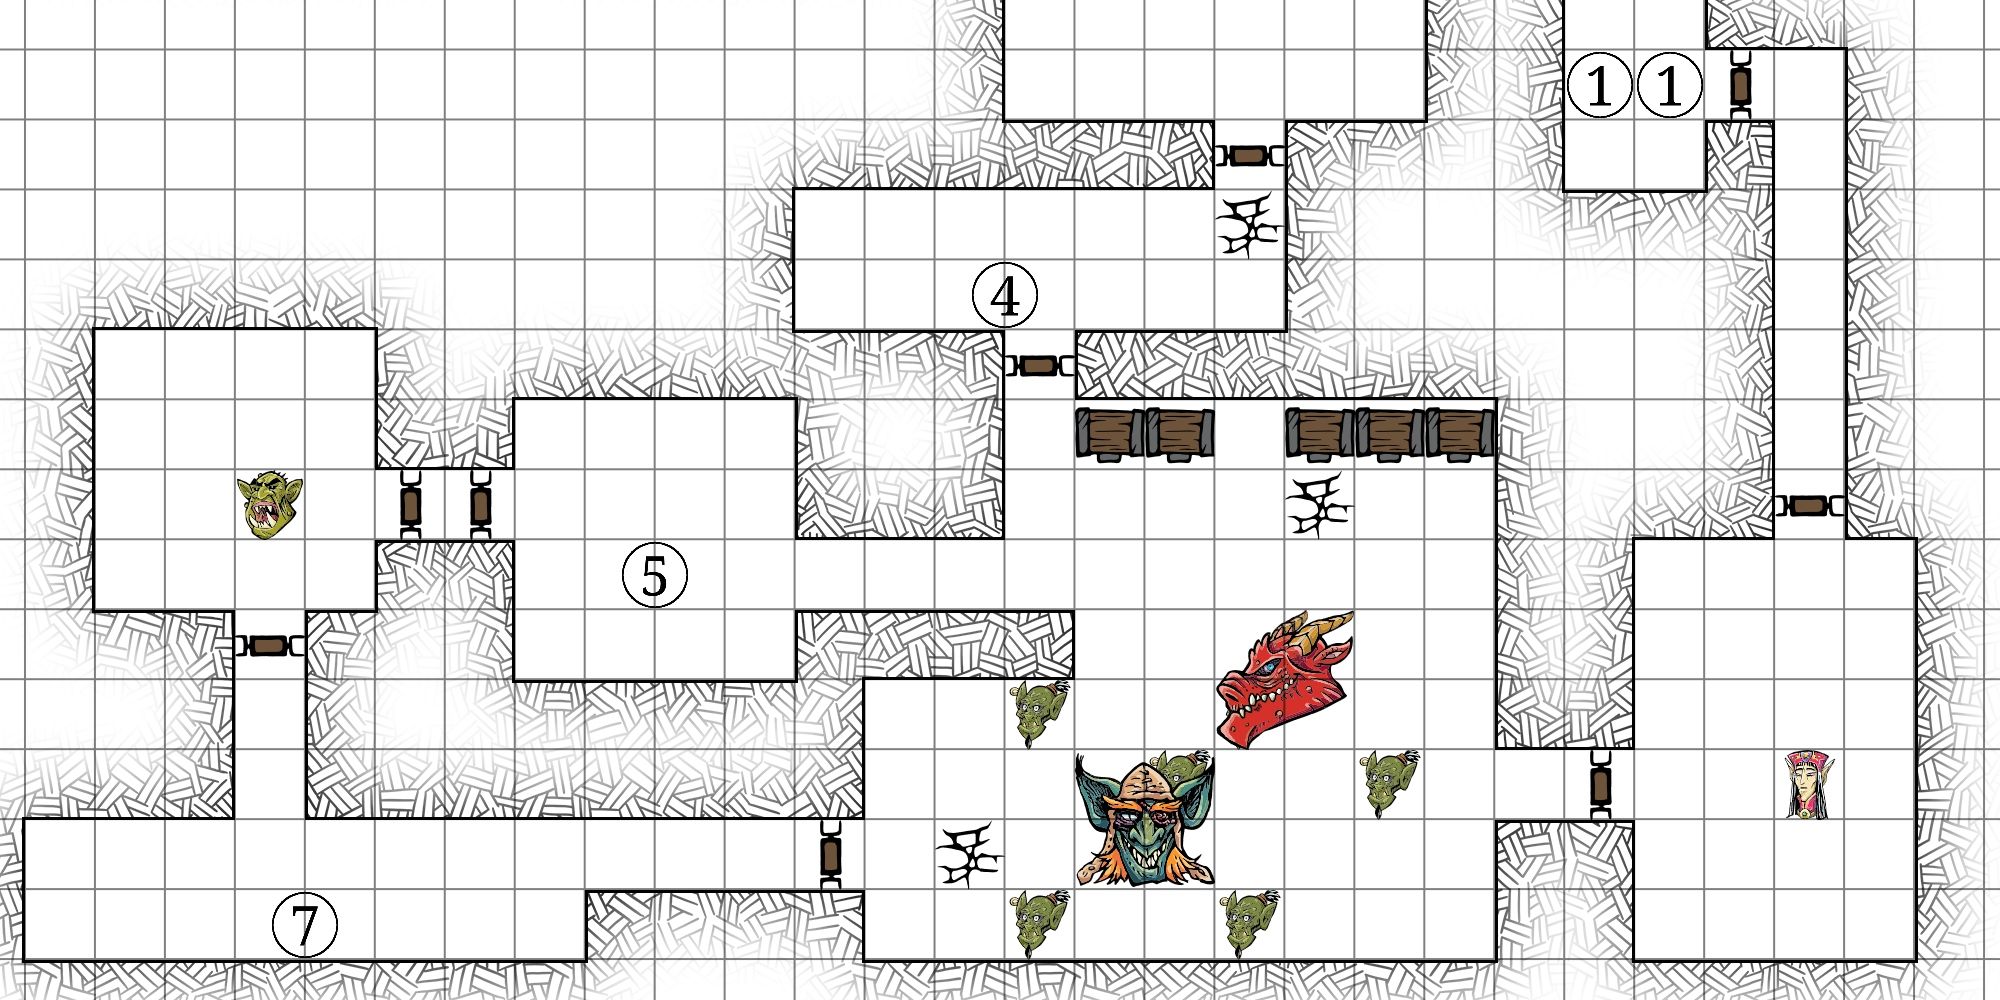 Mostly black and white dungeon map with colored enemy markers